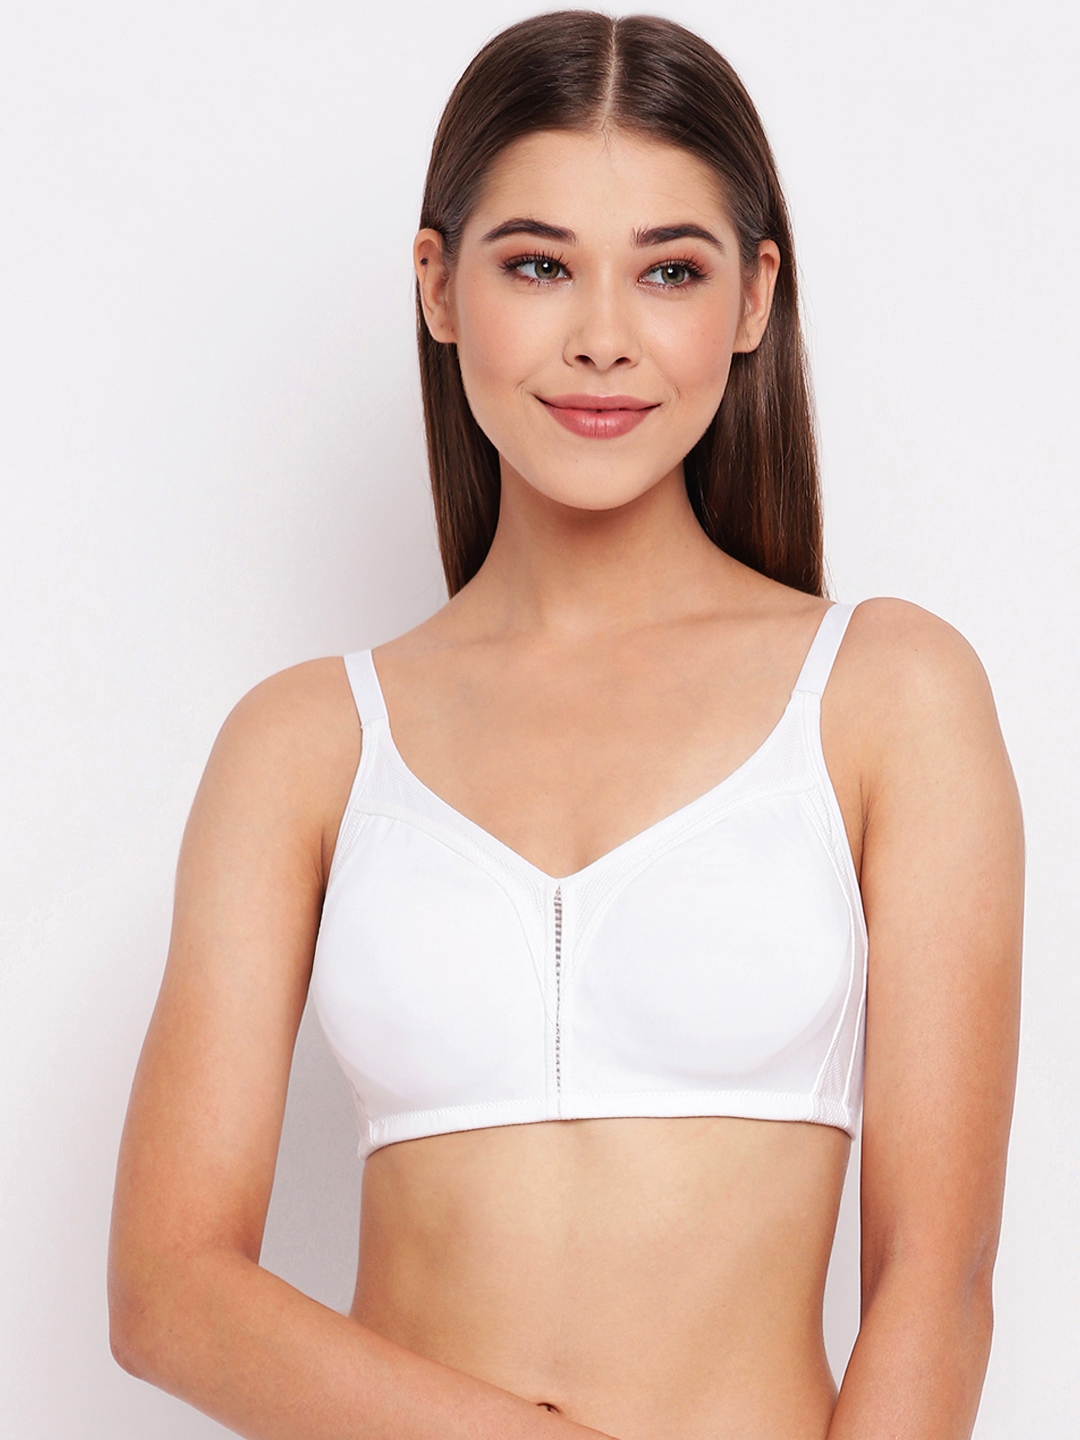 Meesho Bra Review #meeshoreview #brareview #bralette #channelreview  #reviewchannel #undergarments 